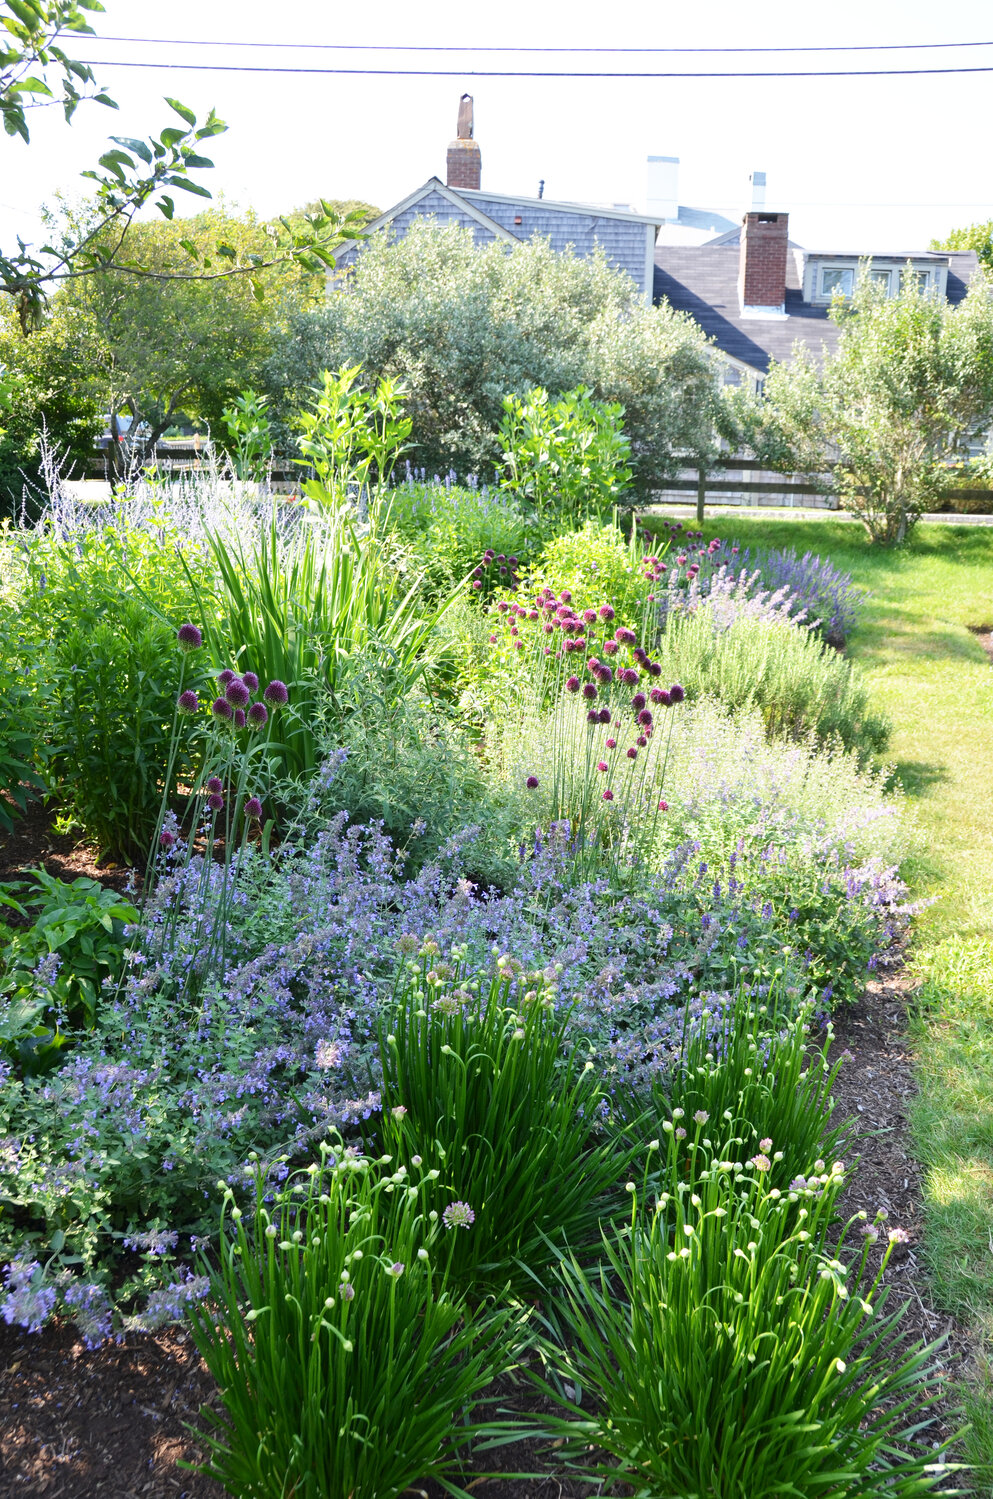 The Nantucket Land Bank’s Garden of the Sea at 14 and 16 Candle House Lane.